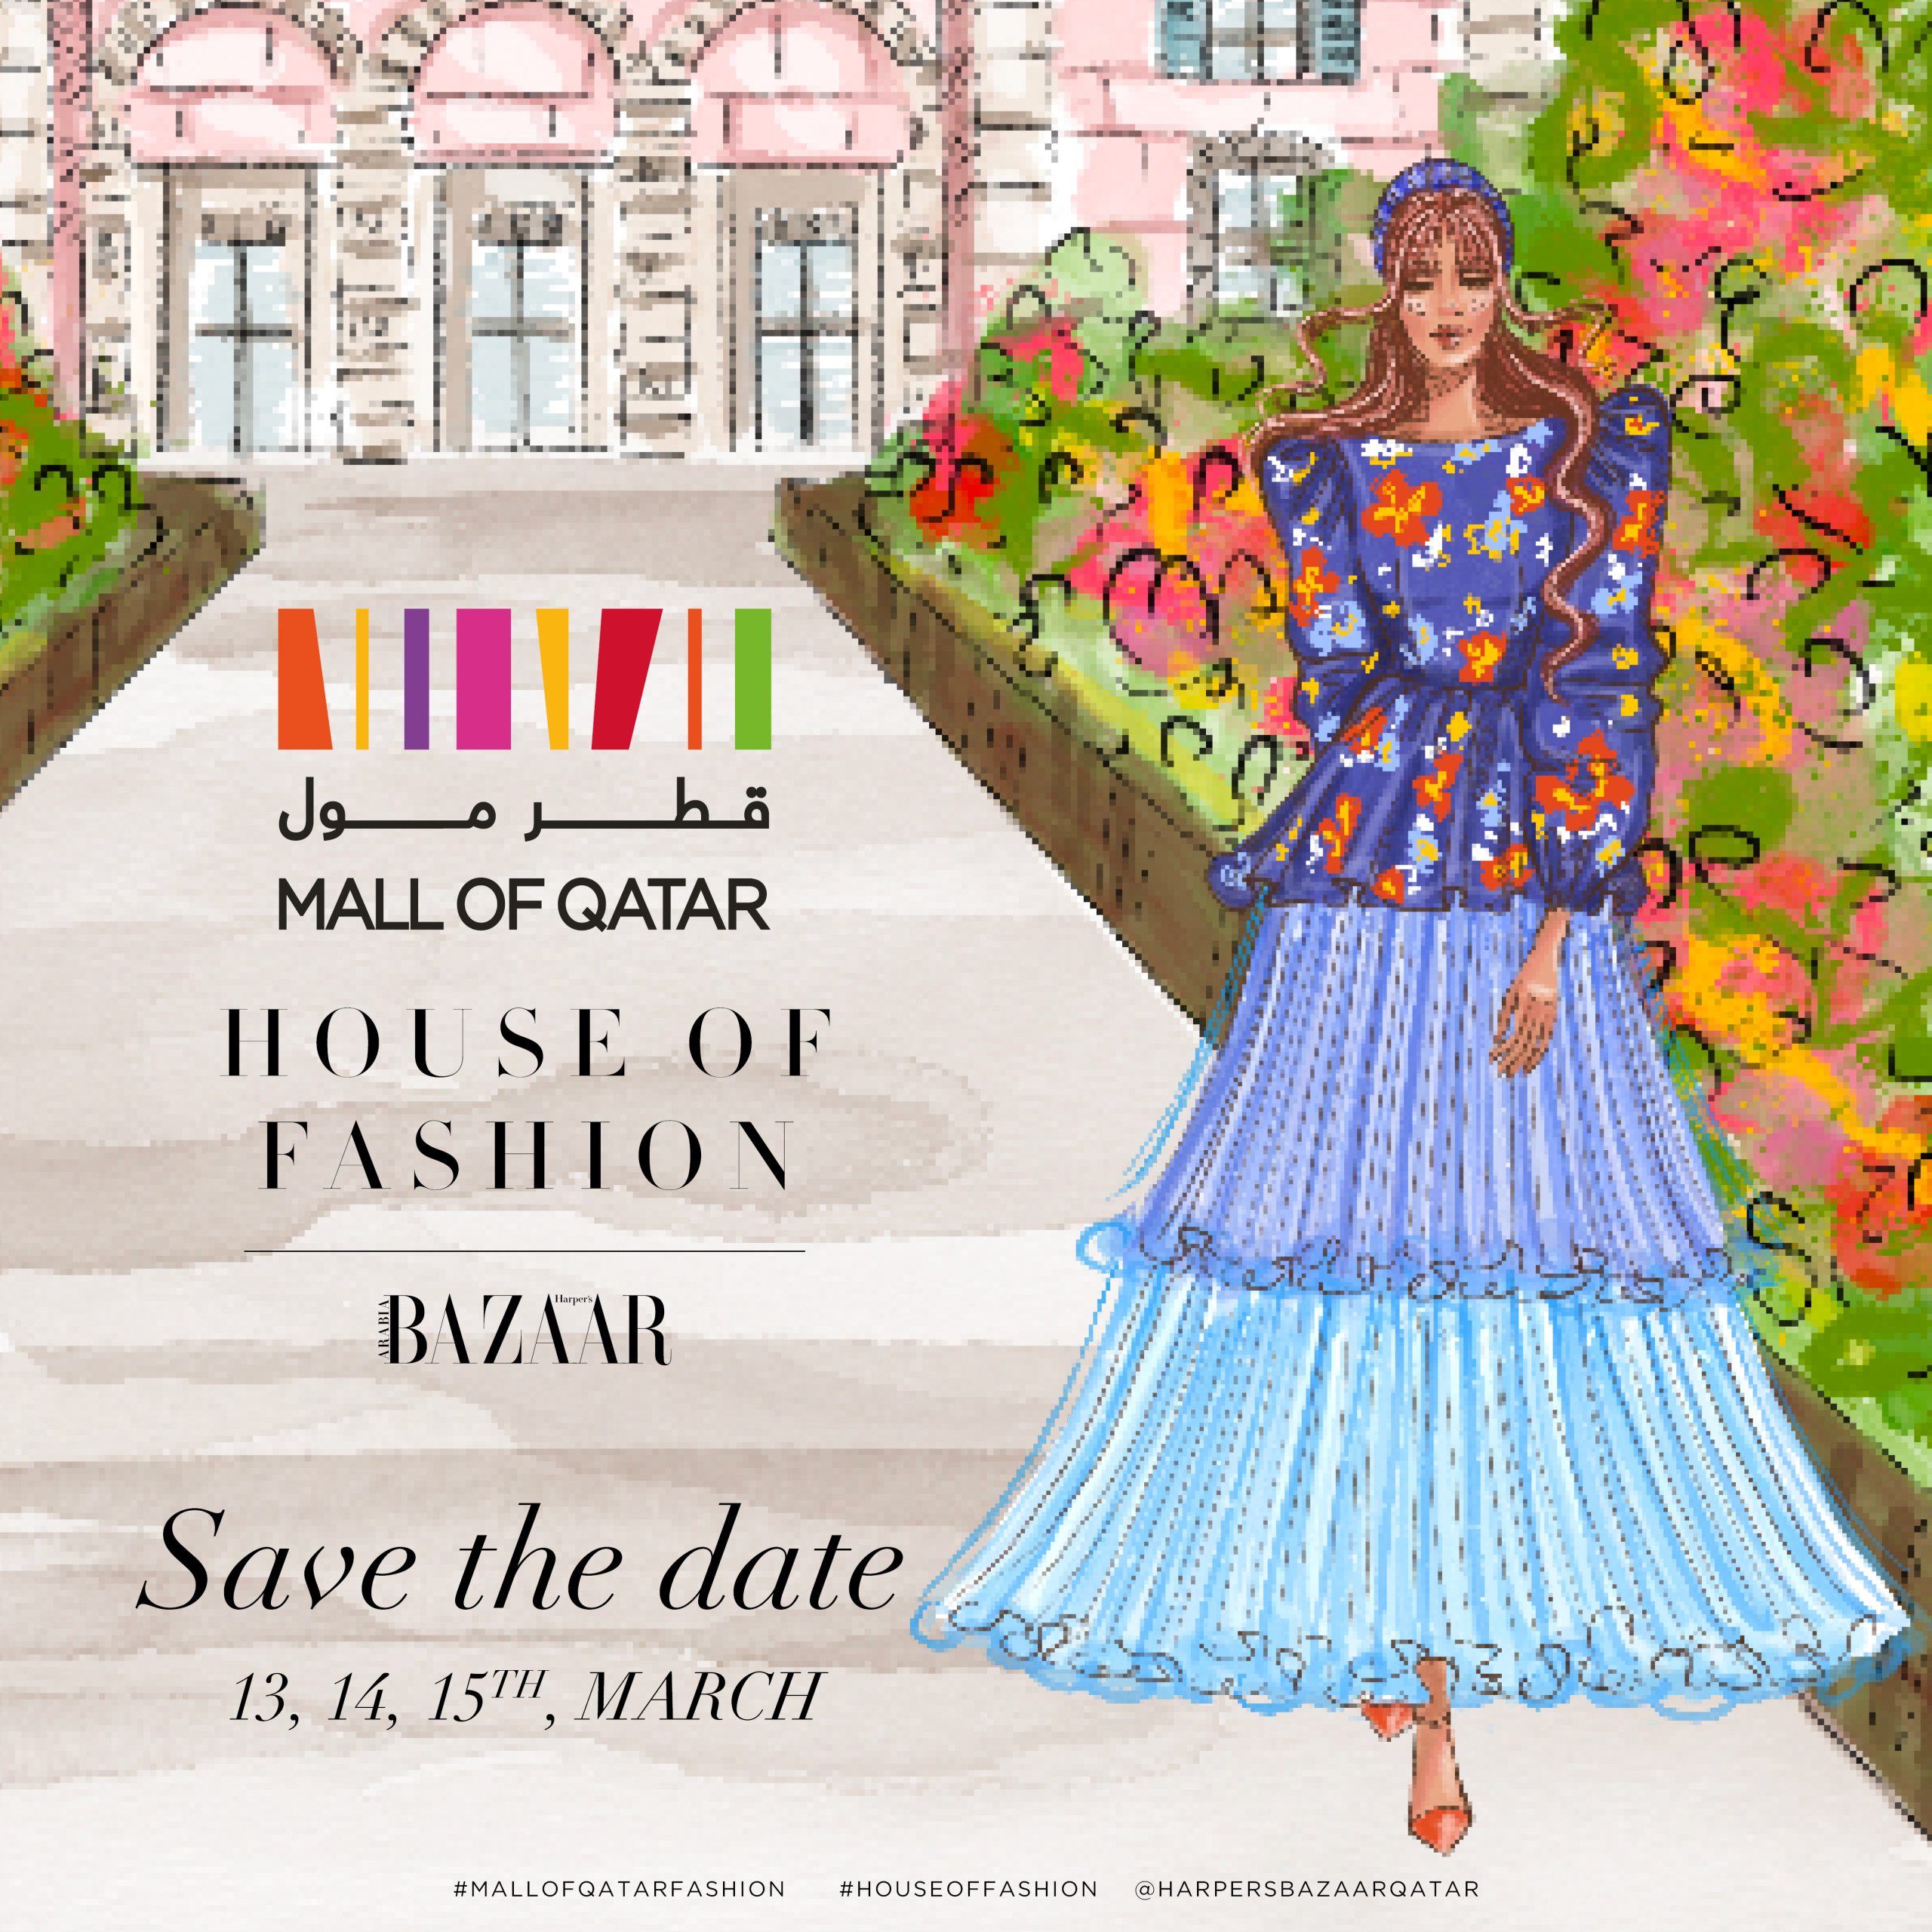 Save the date! Mall of Qatar presents three-day celebration at ‘House of Fashion’